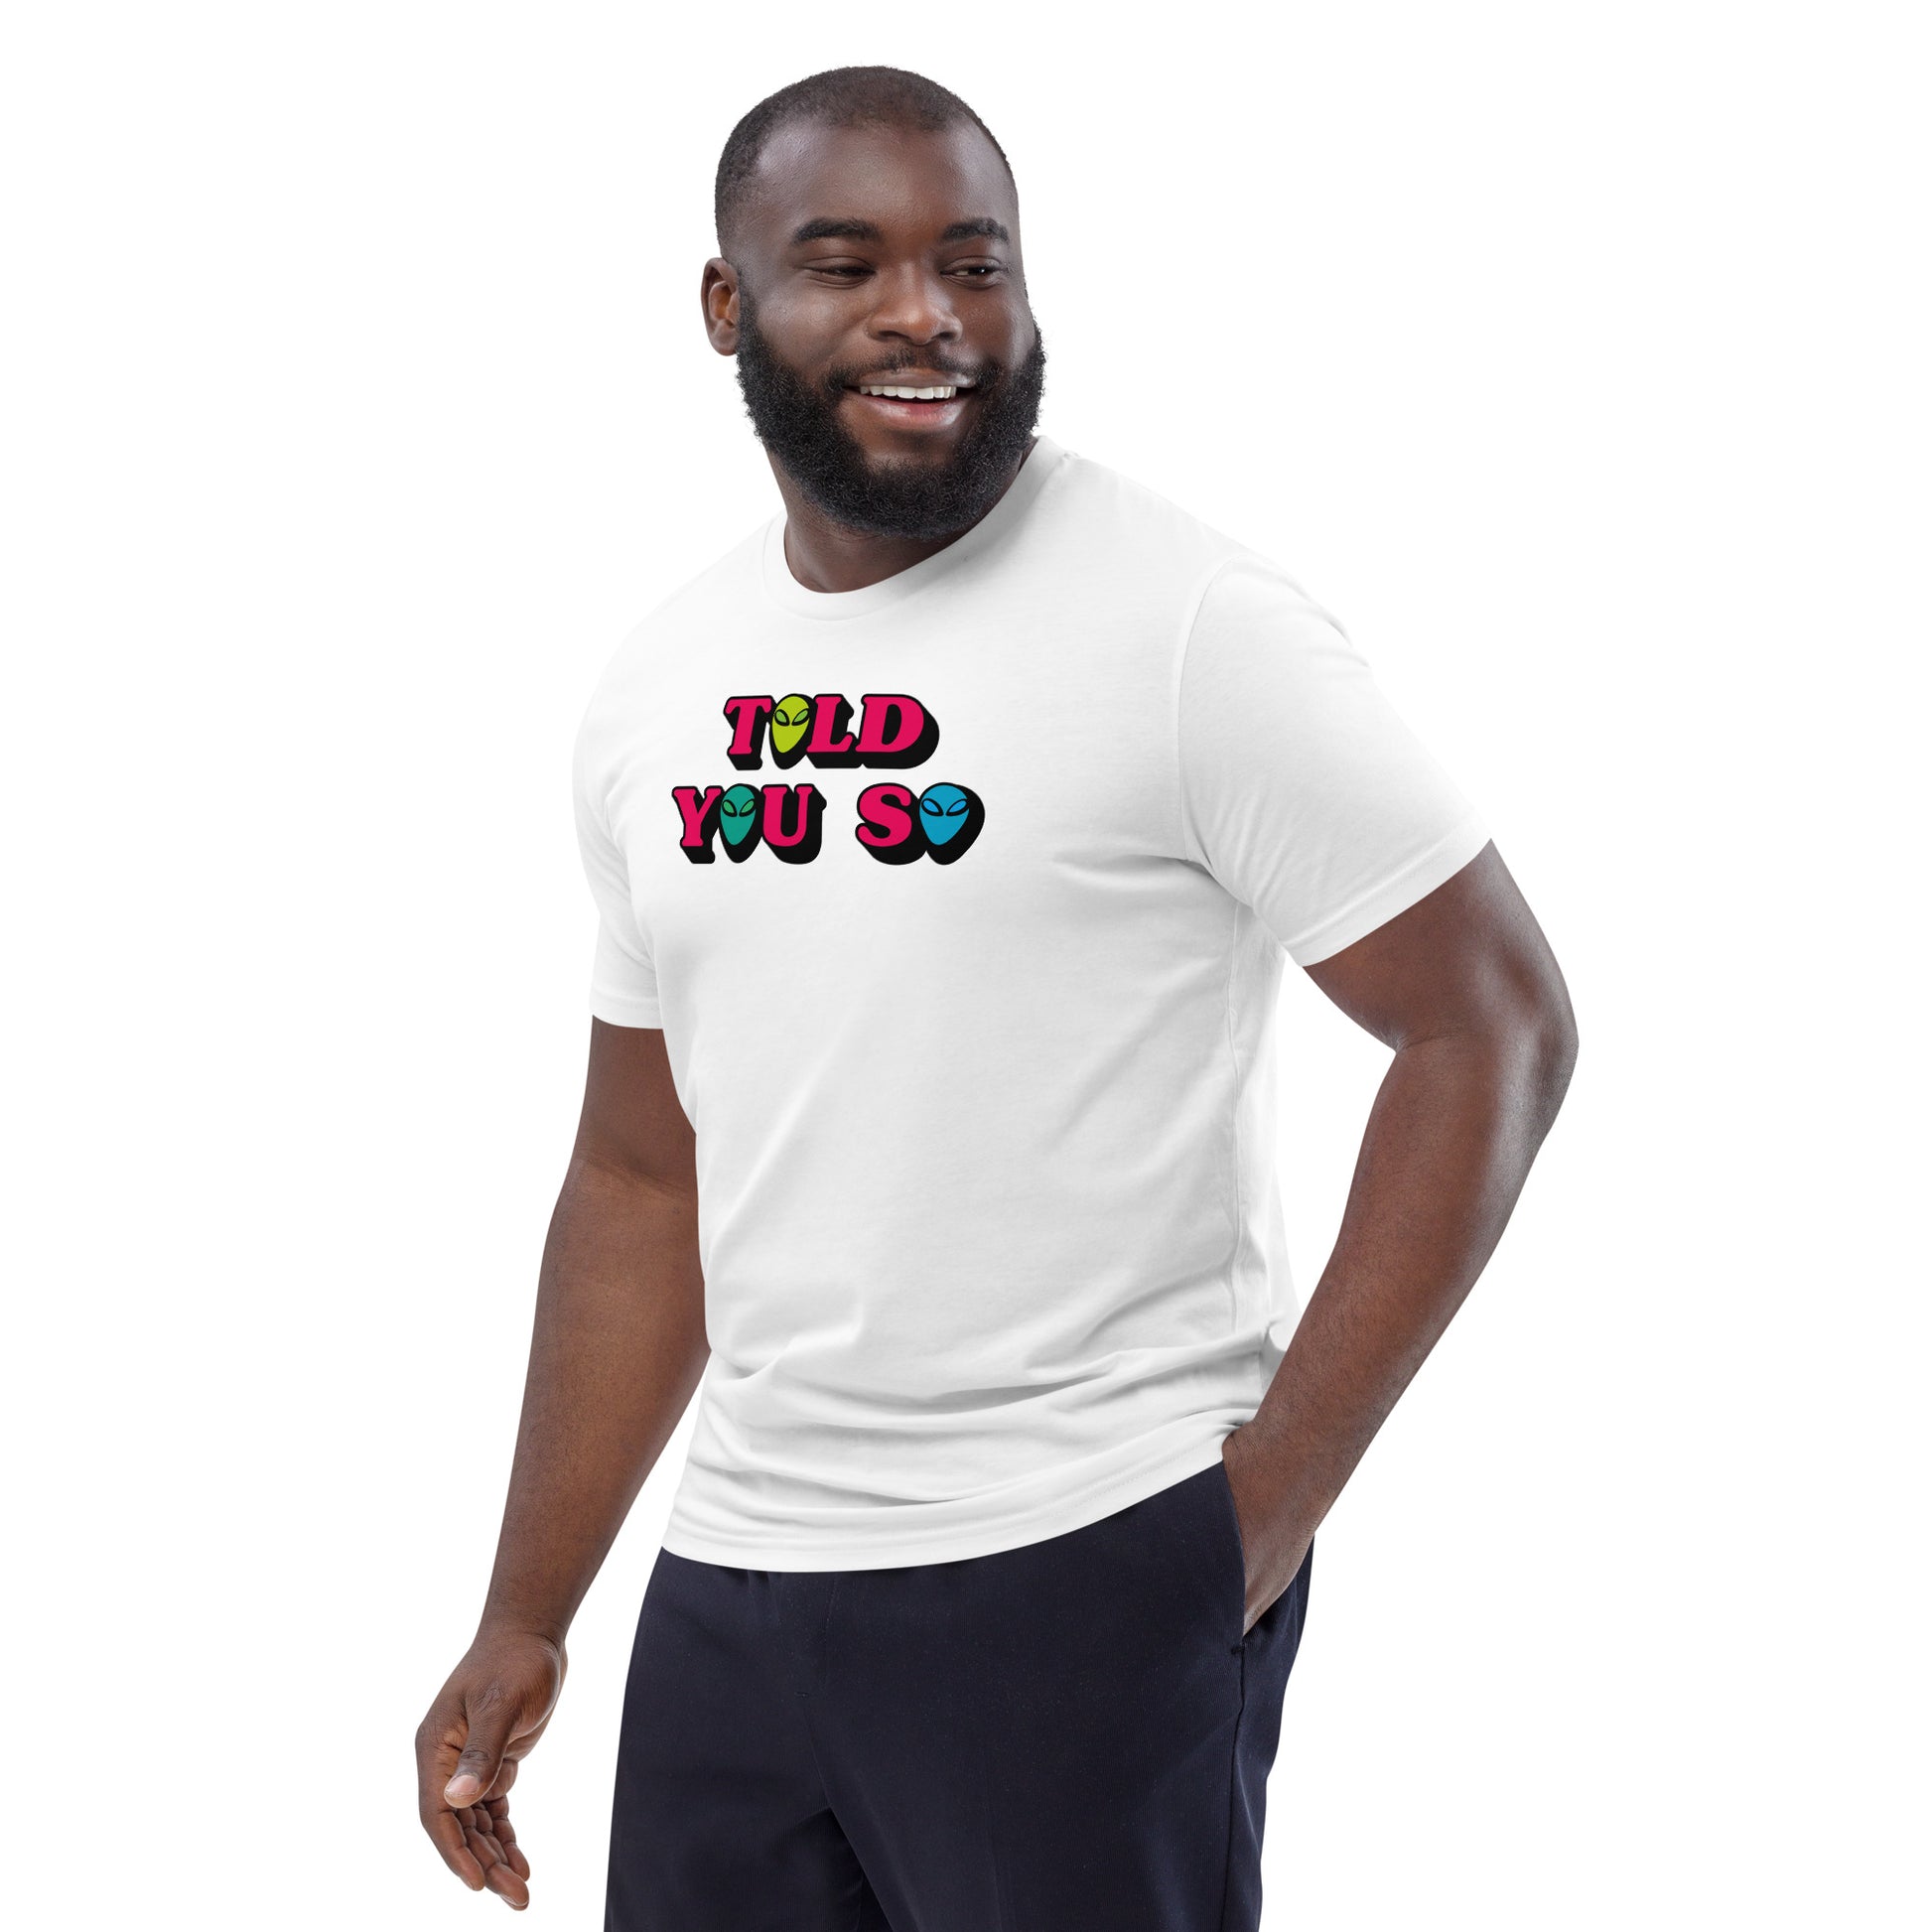 #WEIRDO | BREAKING NEWS! Ufo’s spotted! This white, cotton T-shirt is 100% organic and is for weird men who know the aliens are already amongst us!